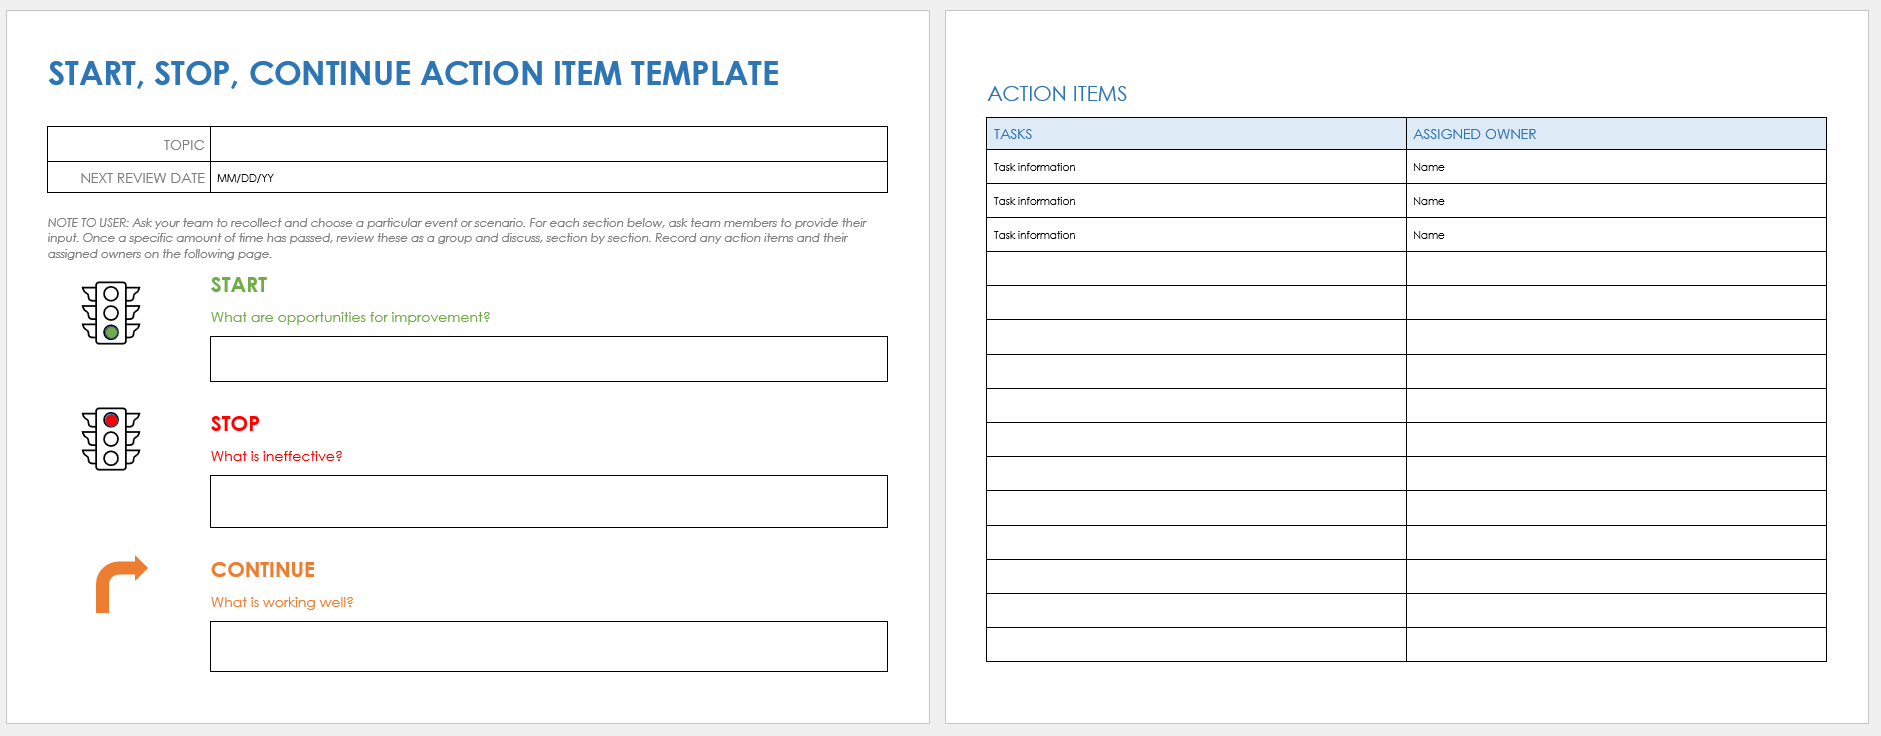 Start, Stop, Continue Action Item Template